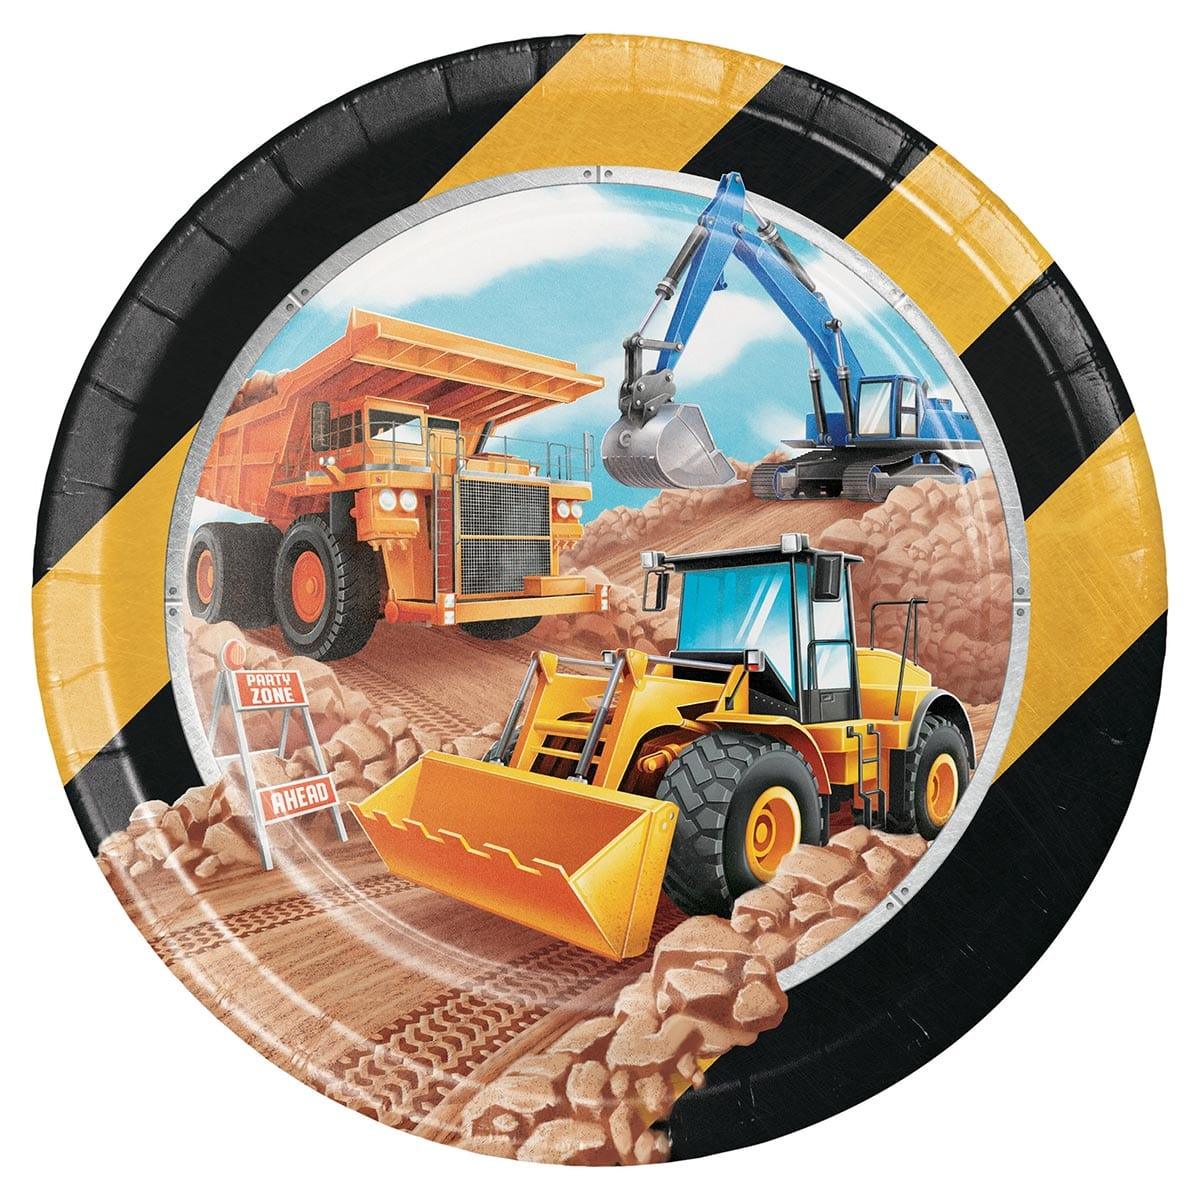 Buy Kids Birthday Big Dig Construction Dinner plates 9 inches, 8 per package sold at Party Expert